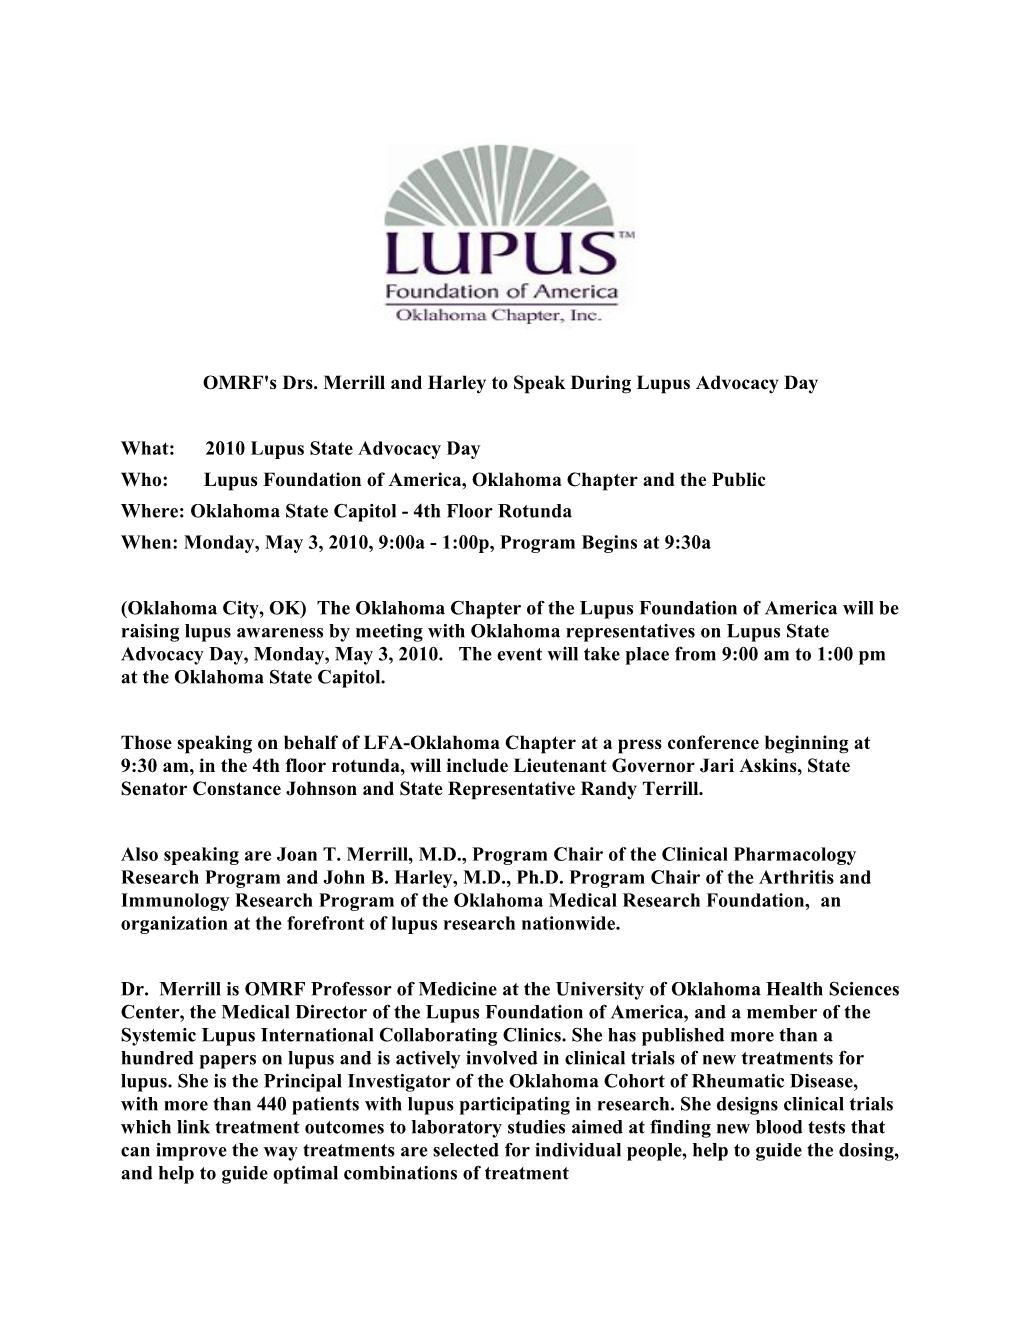 OMRF's Drs. Merrill and Harley to Speak During Lupus Advocacy Day